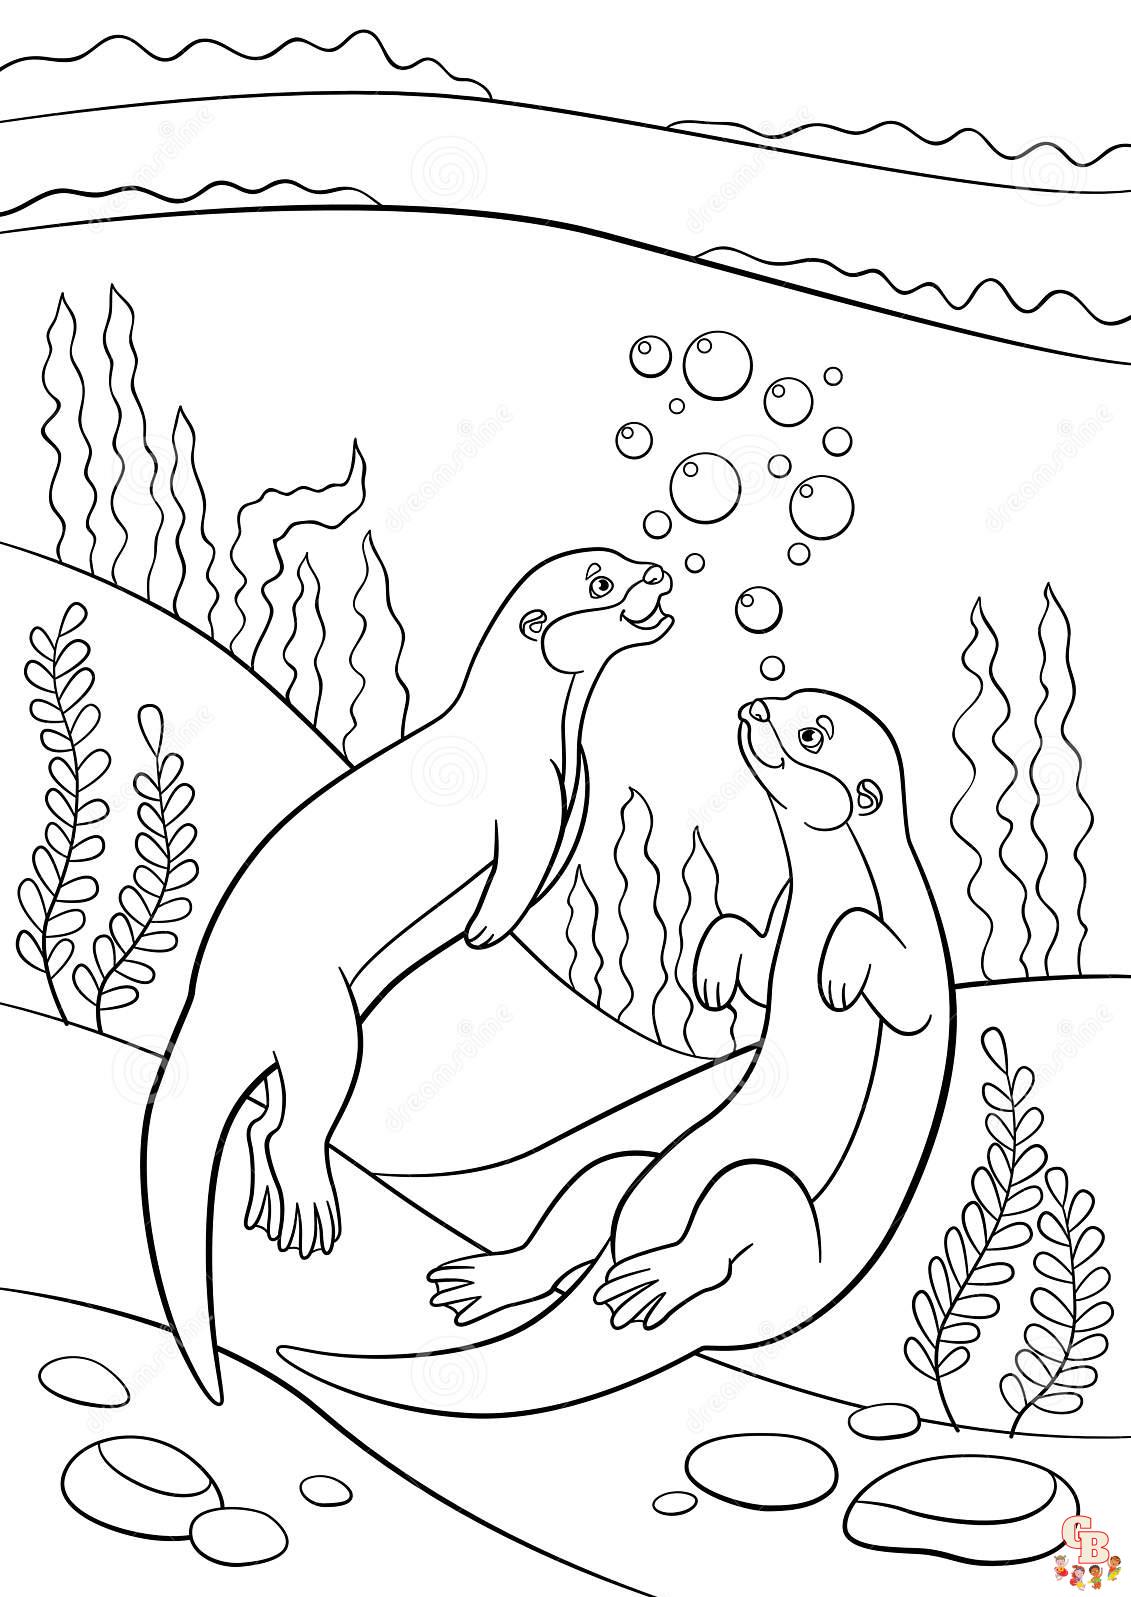 Otter Coloring Pages 6